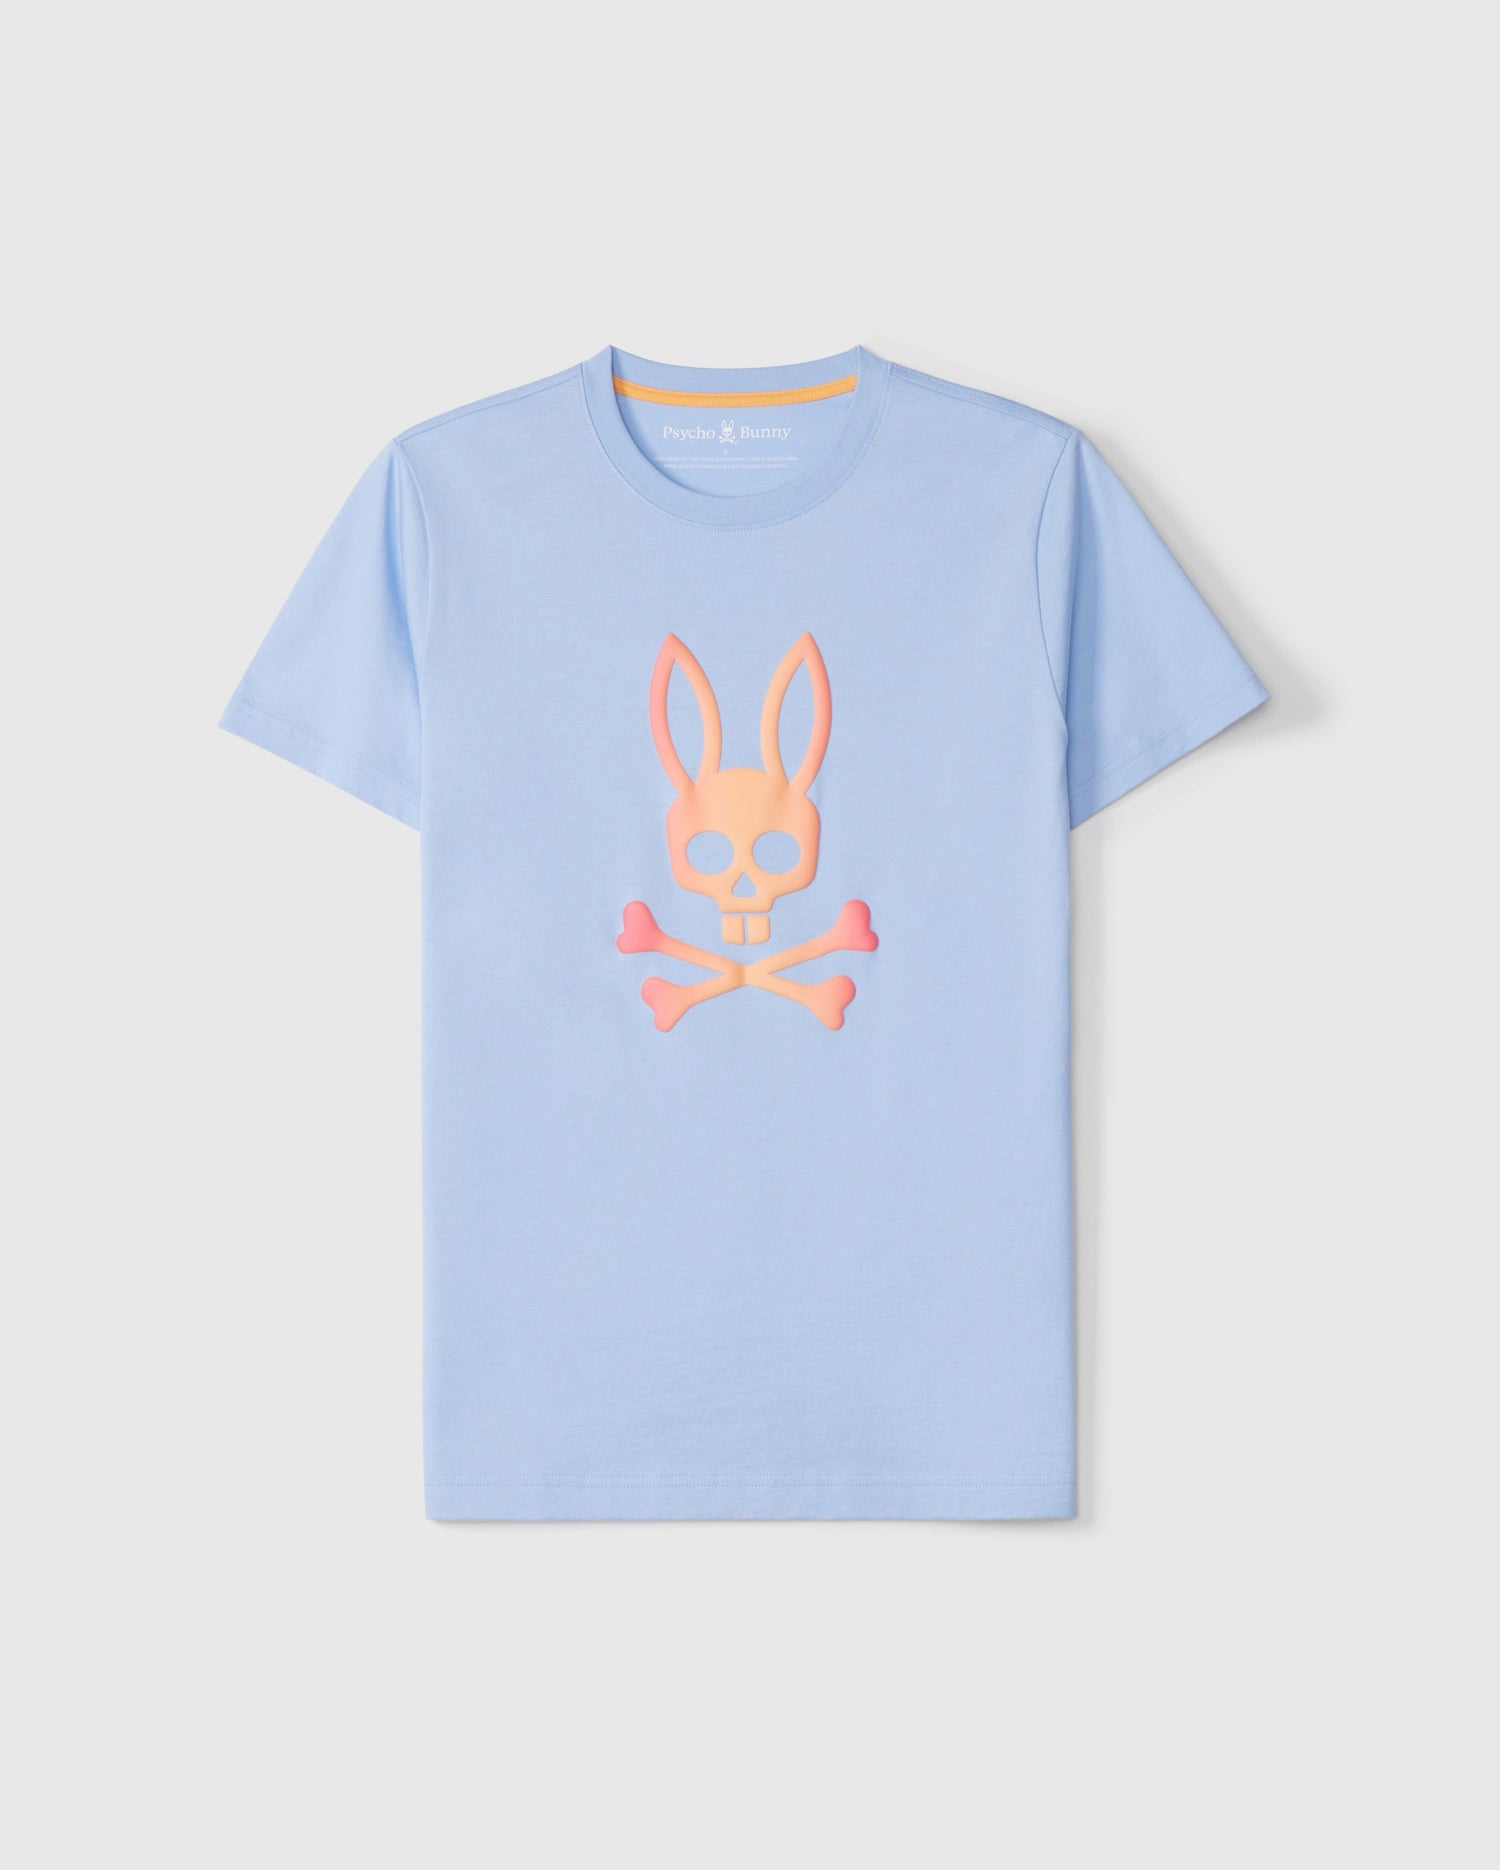 A light blue short-sleeve graphic tee featuring a stylized bunny skull and crossbones design in the center. The graphic, showcasing an ombre effect in peach and pink, is printed on luxurious Peruvian Pima cotton. The **Psycho Bunny MENS NORWOOD GRAPHIC TEE - B6U311B2TS** is displayed on a plain white background.